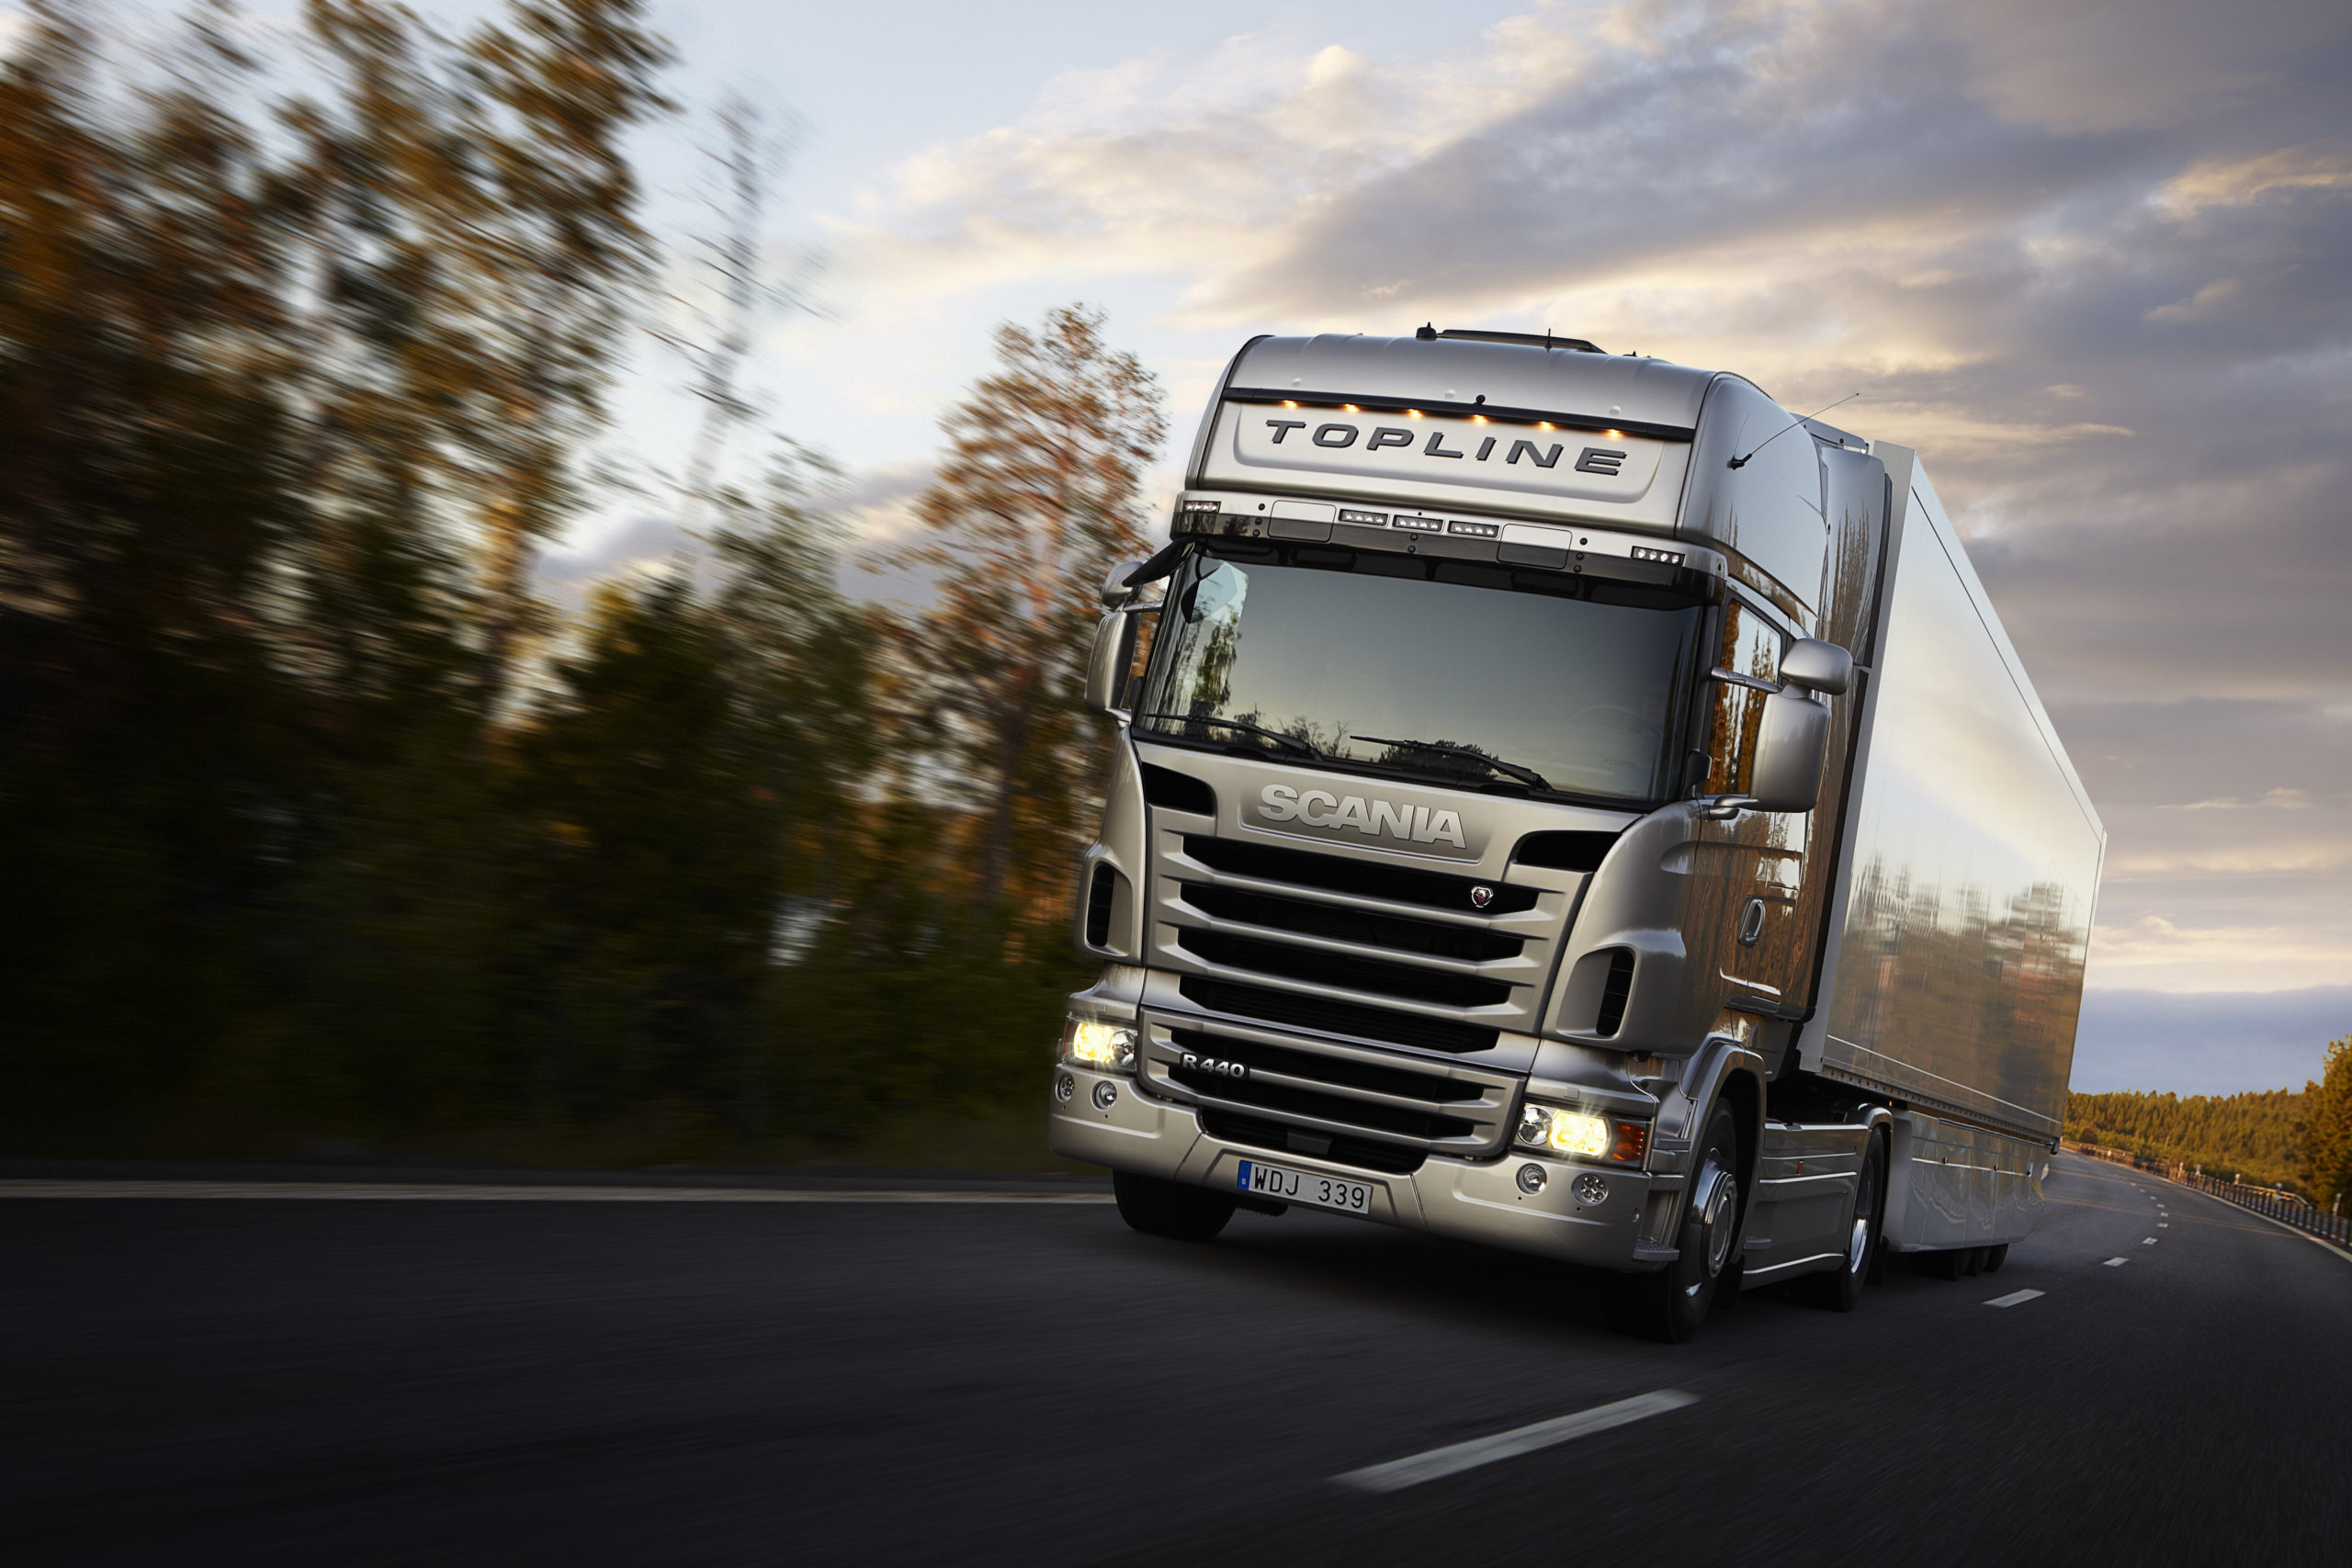 LXP - Lifexpe - Scania R 440 4x2 Topline Scania truck Health, Cost & Staff Benefits by Fleet Management Systems